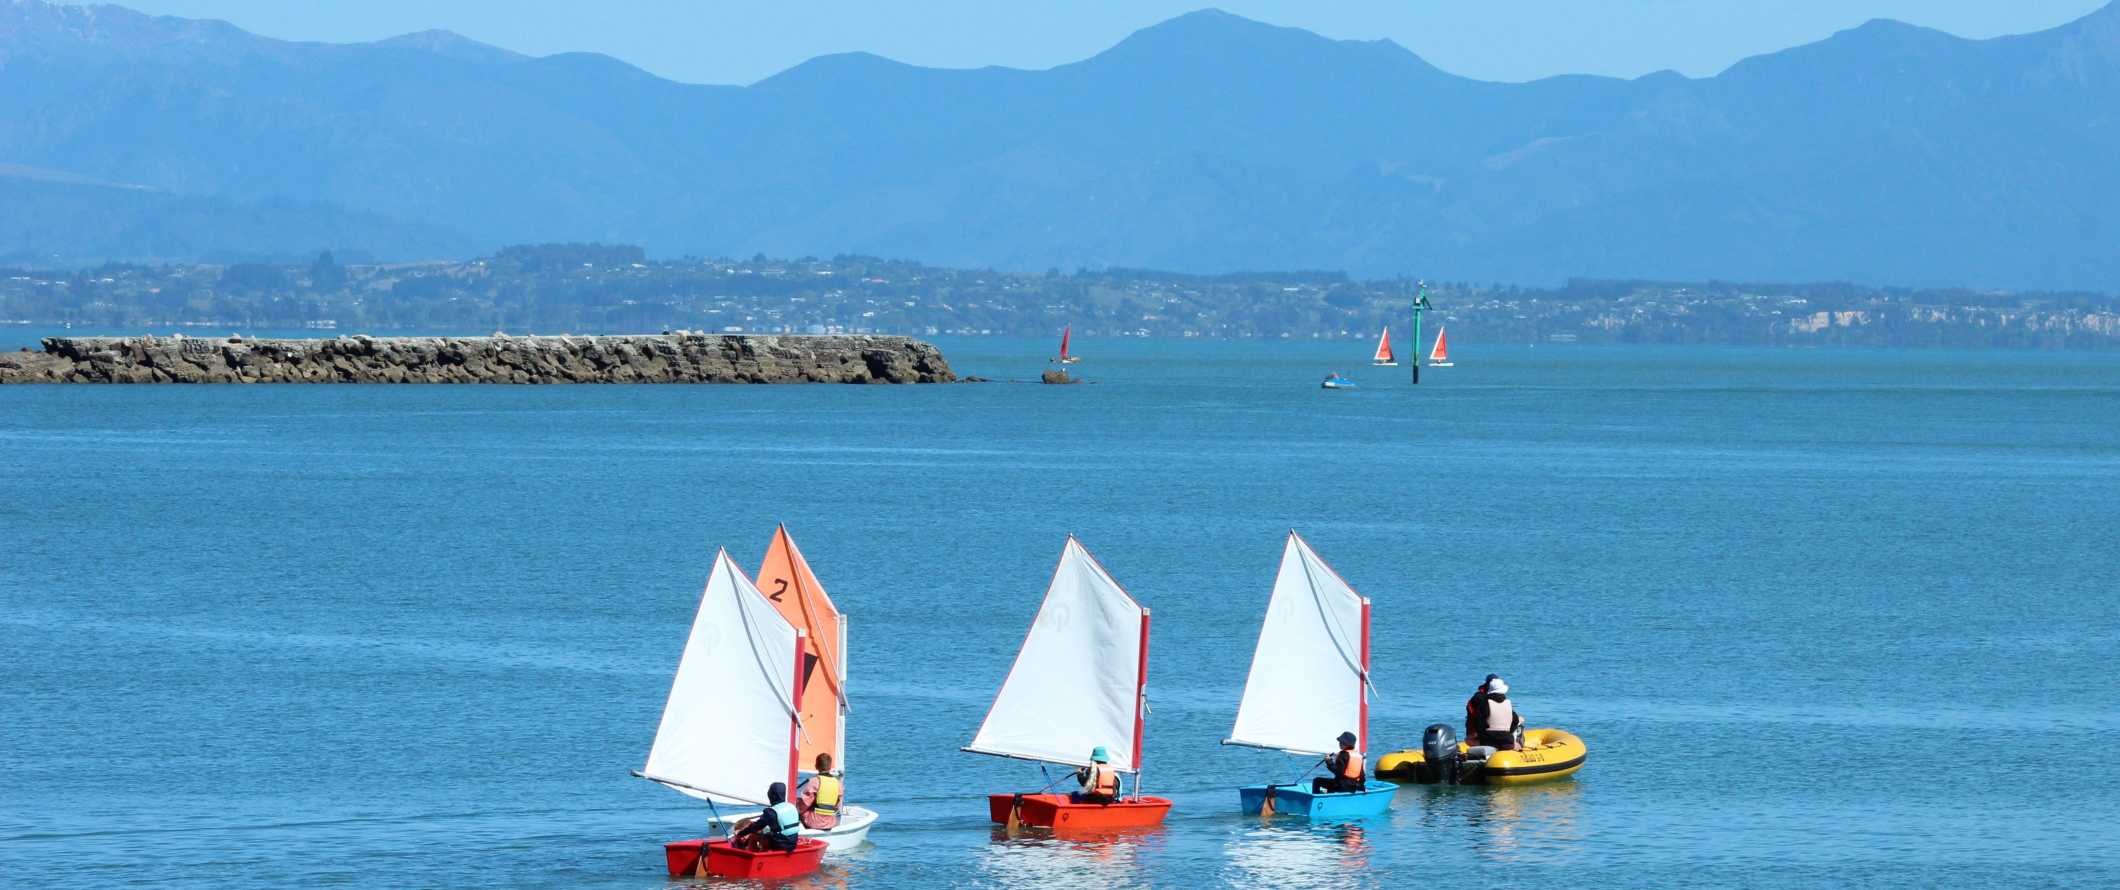 Tiny sailboats in the harbor near the town of Nelson in New Zealand.